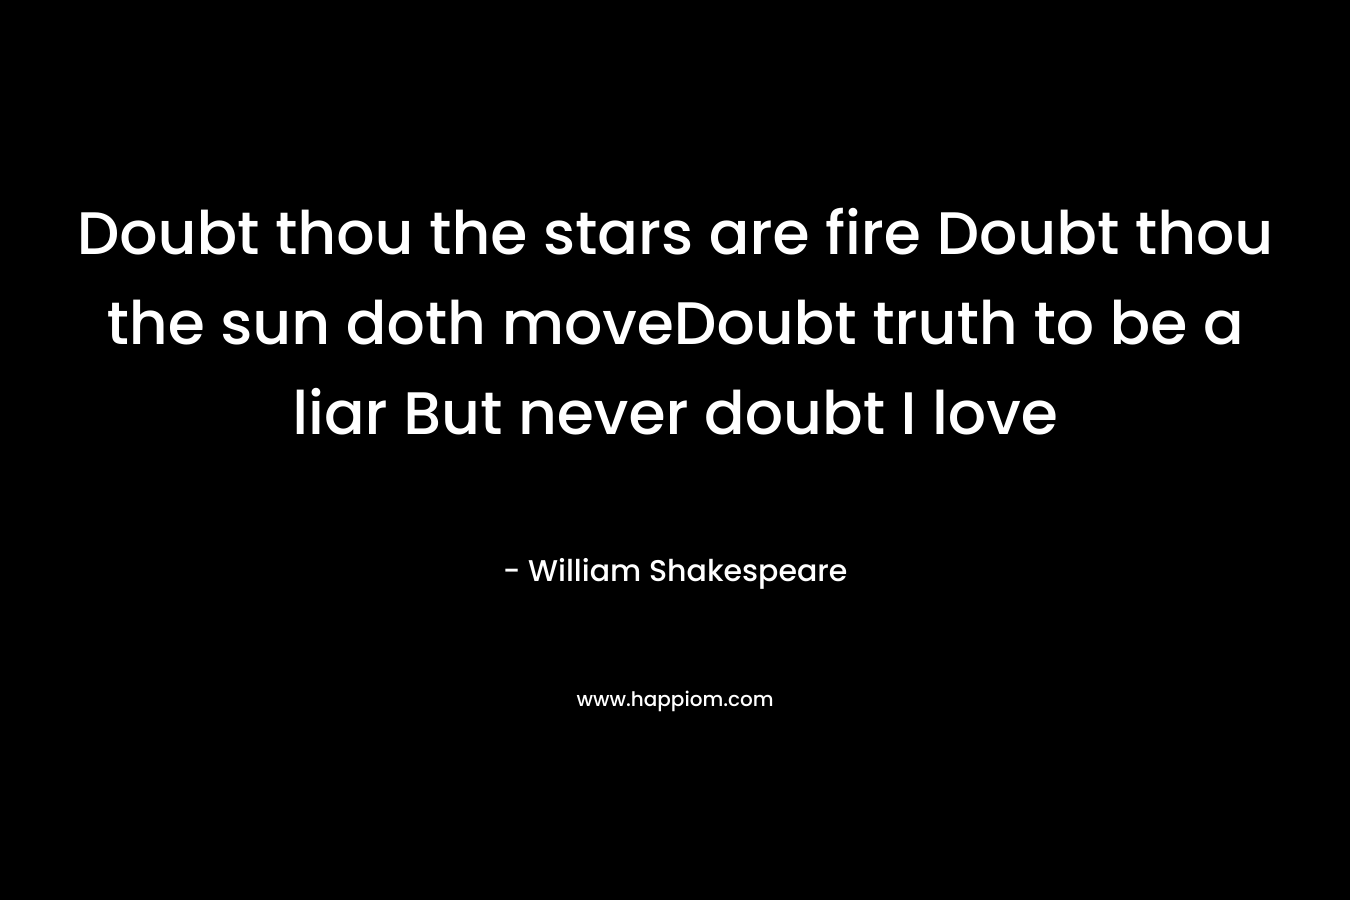 Doubt thou the stars are fire Doubt thou the sun doth moveDoubt truth to be a liar But never doubt I love